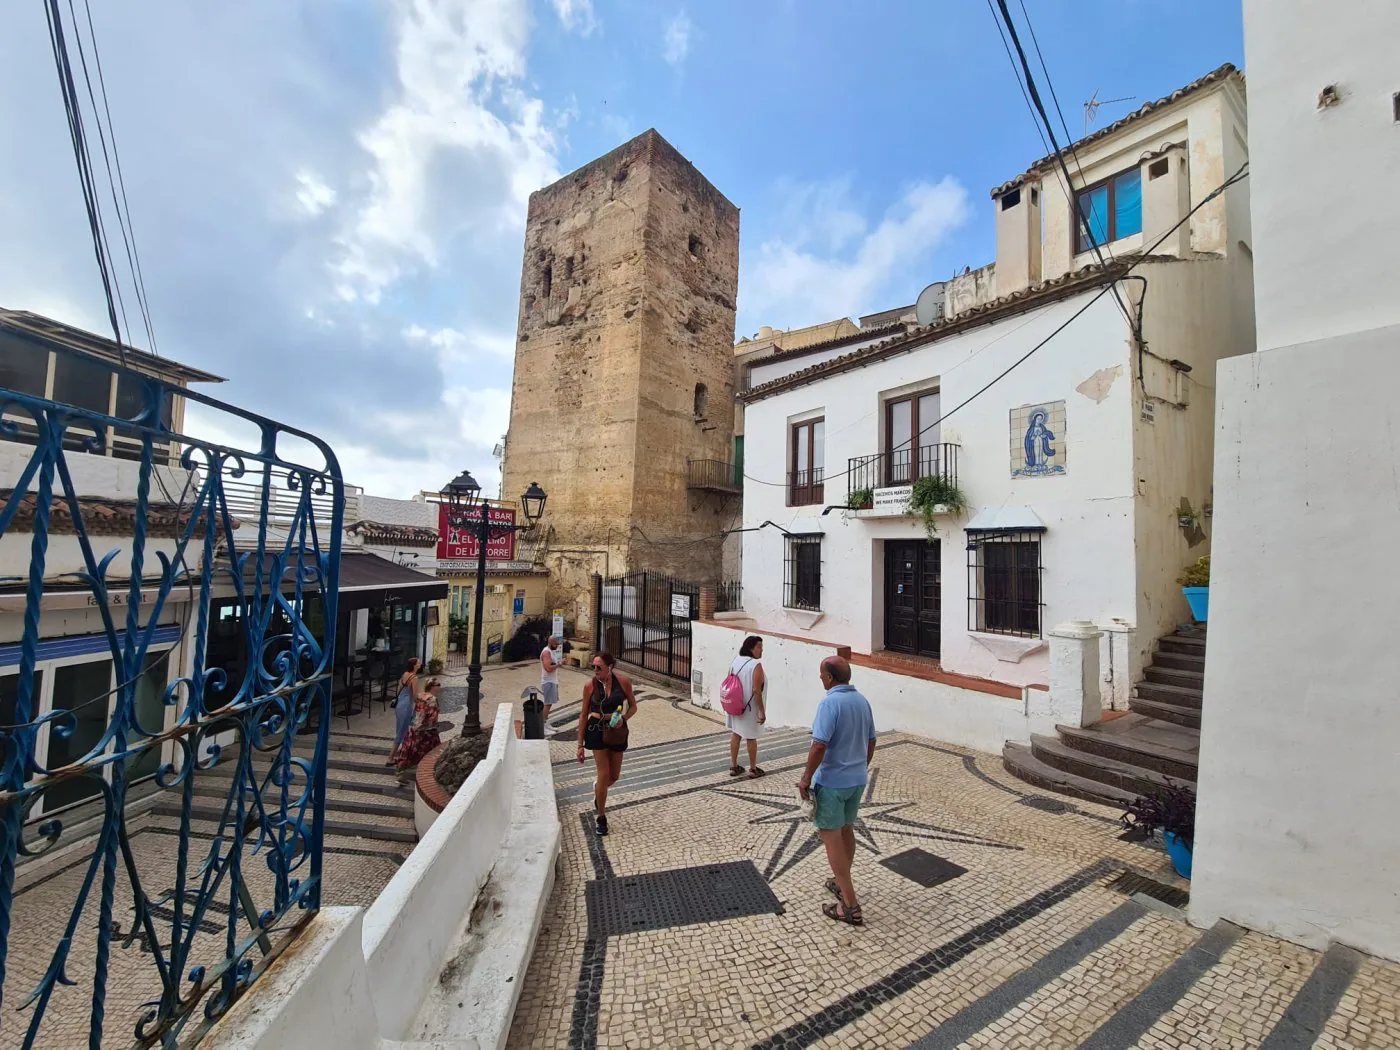 Torremolinos aims to restore mill and showcase local history